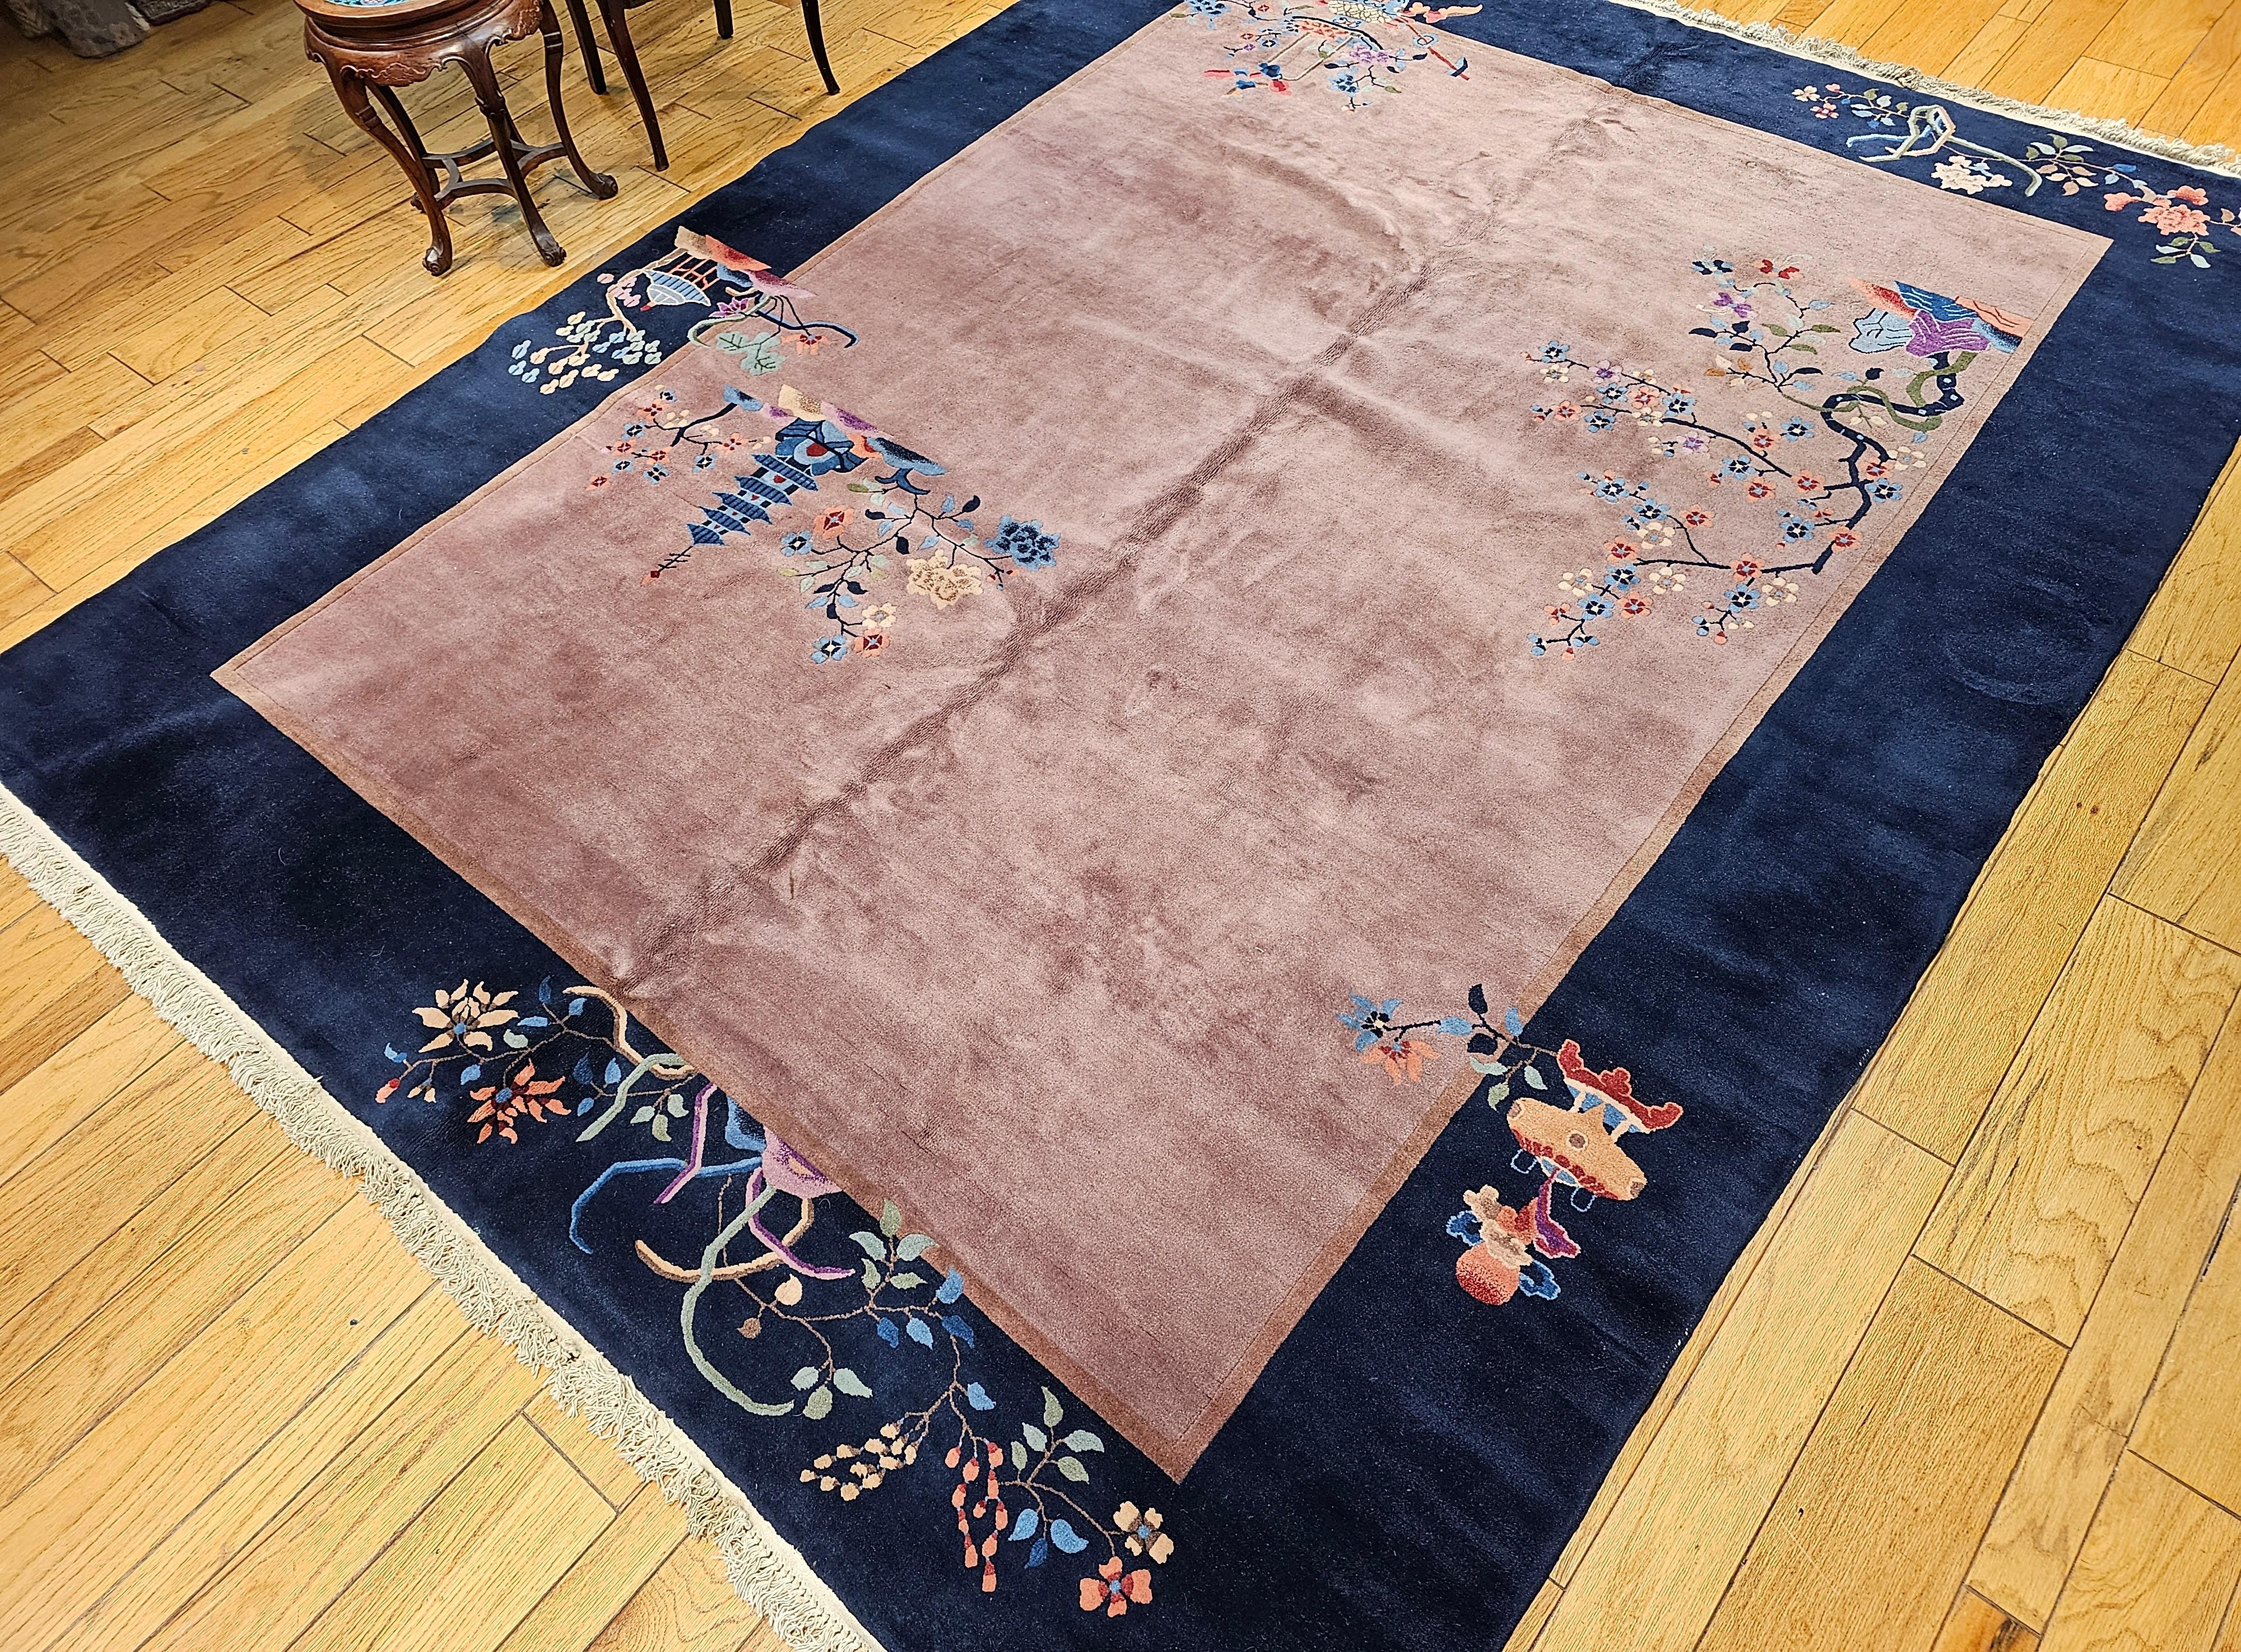 Vintage Art Deco Chinese Nichols Rug in Eggplant, Navy, Blue, Green, Pink For Sale 9